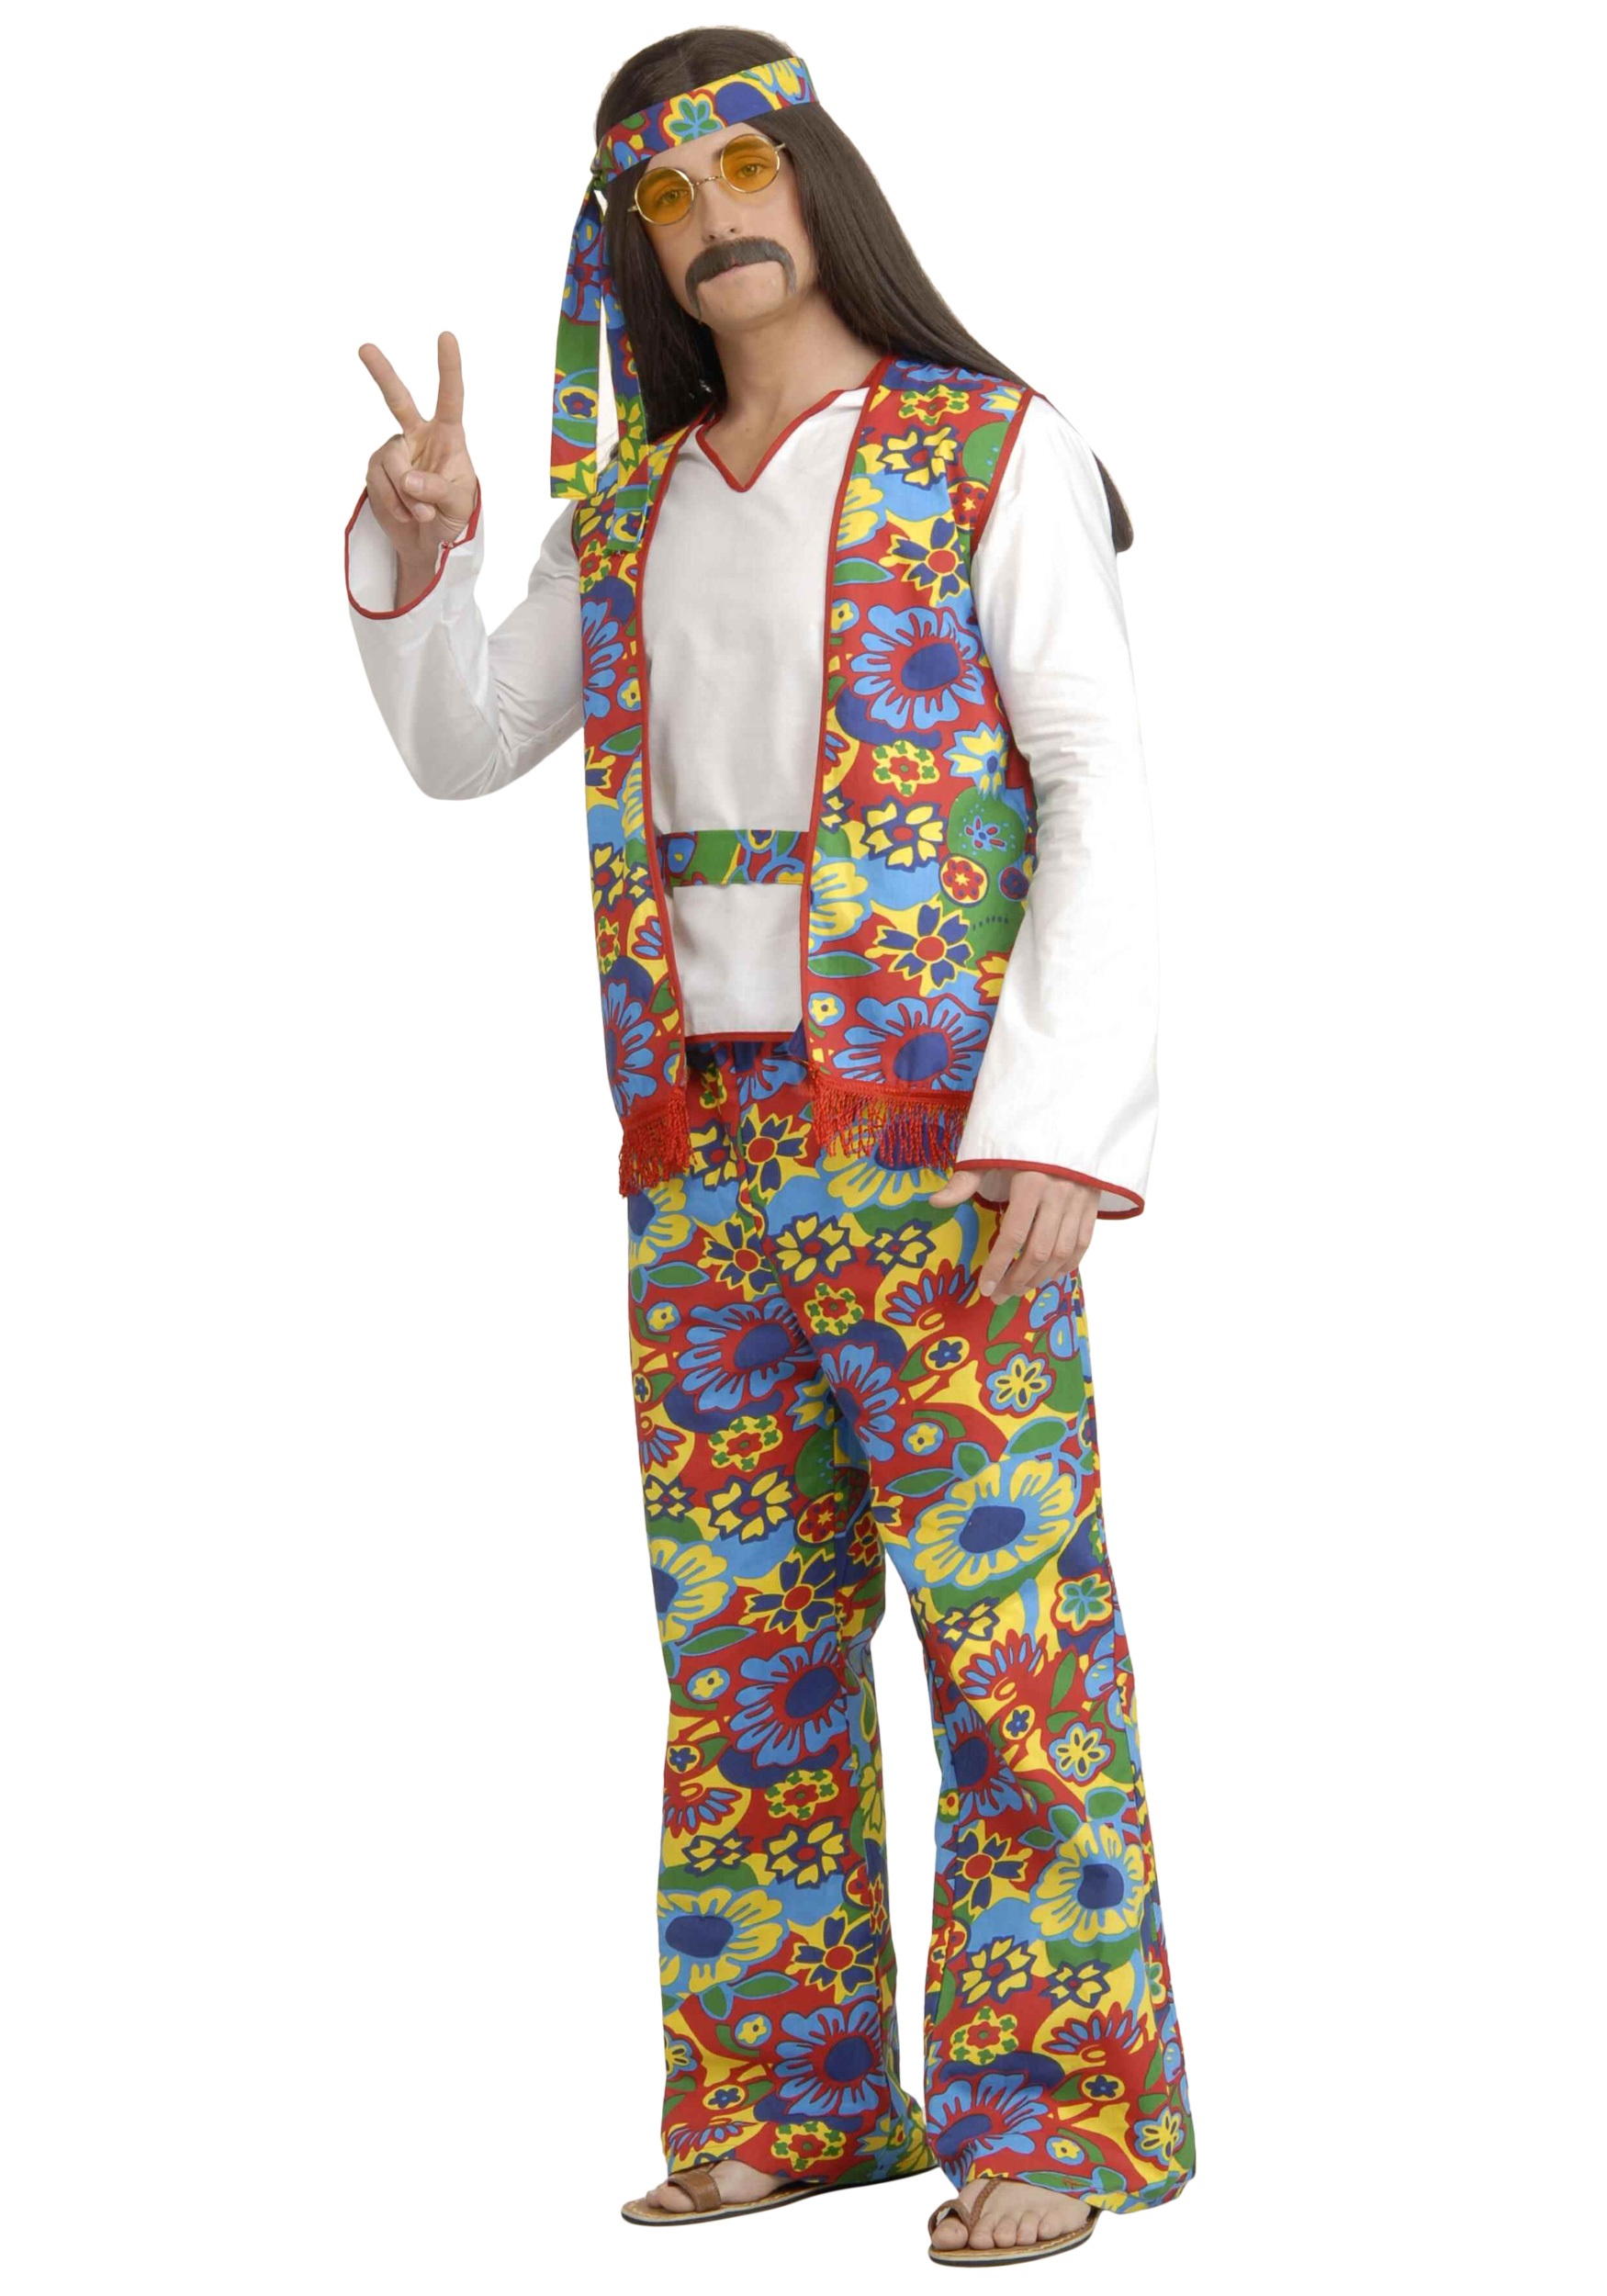 ... Plus Size Men's Hippie Costume! This bright costume will make you one